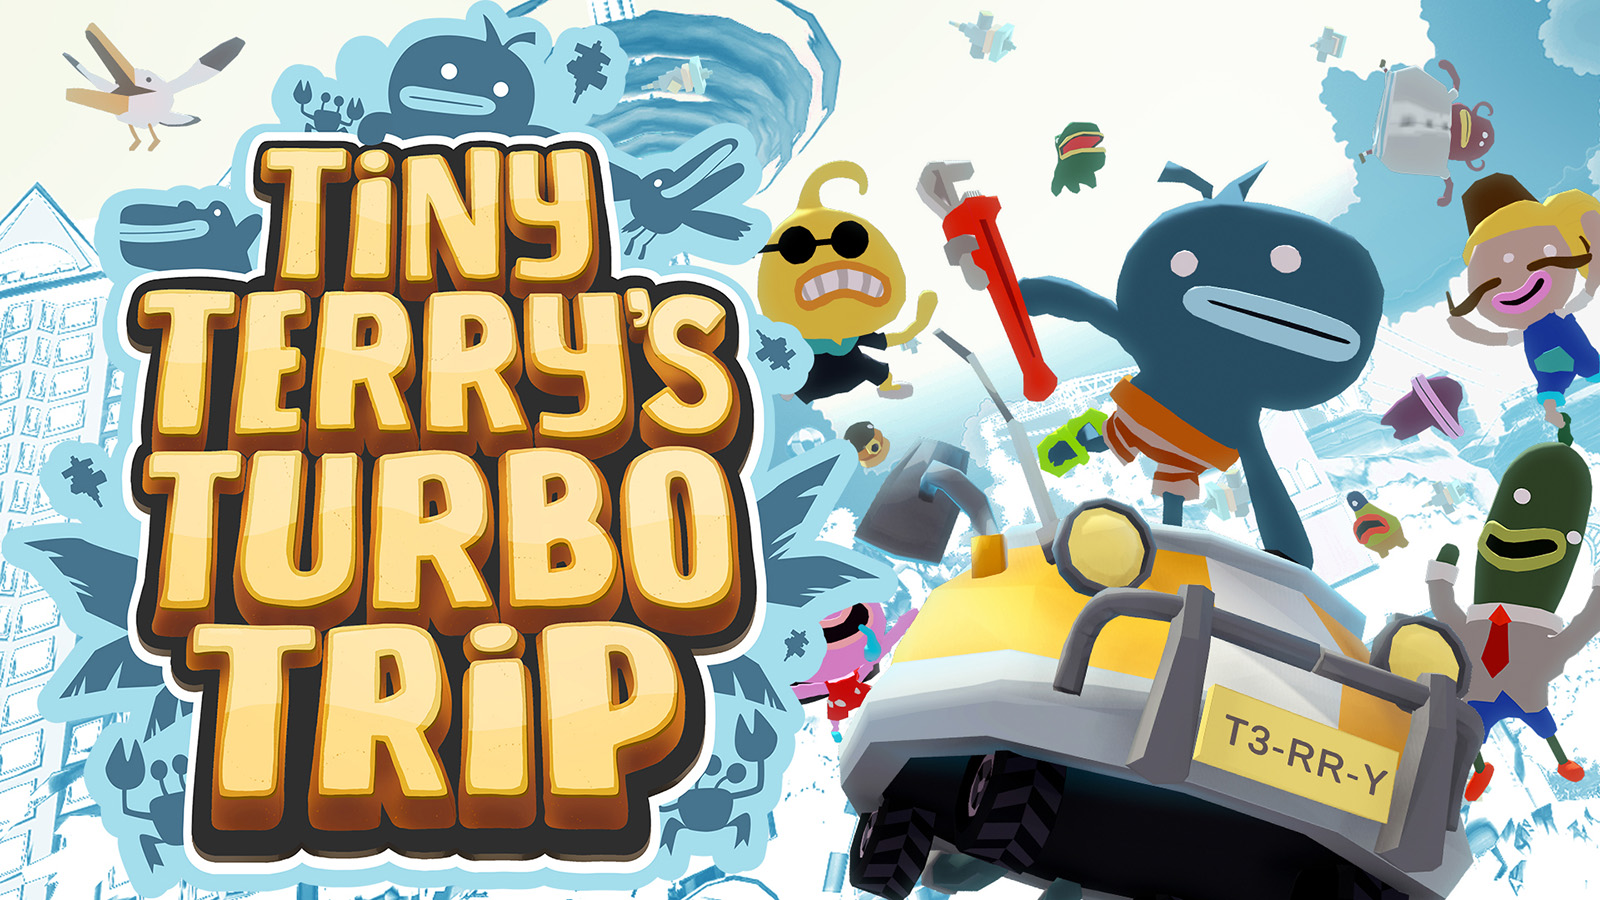 Tiny Terry’s Turbo Trip is a chaotic adventure game launching on PC May 30th